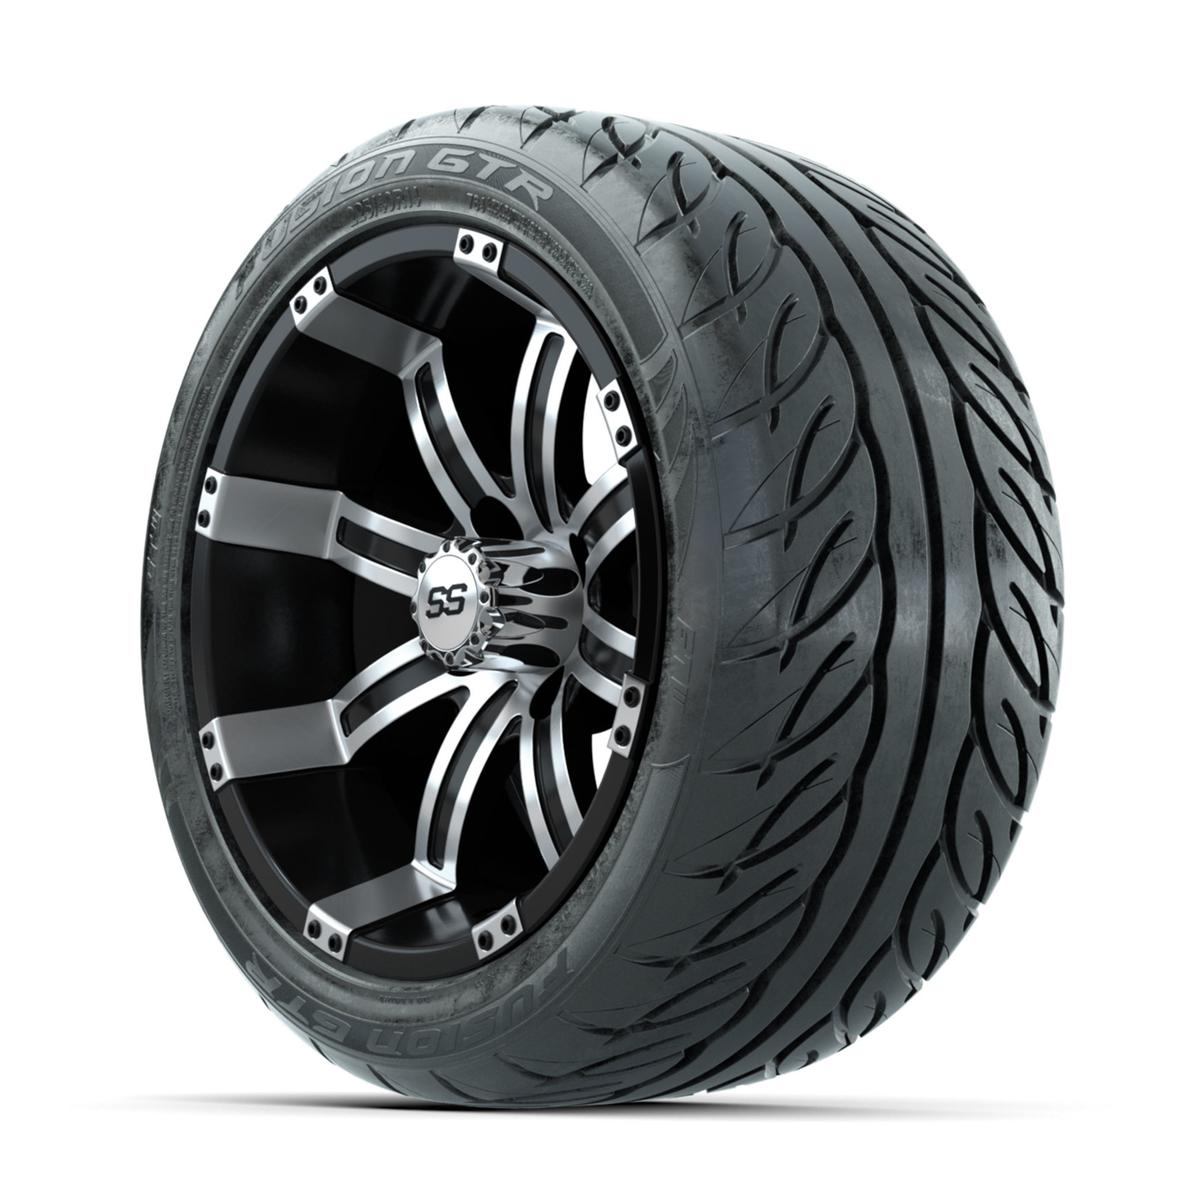 GTW Tempest Machined/Black 14 in Wheels with 225/40-R14 Fusion GTR Street Tires – Full Set